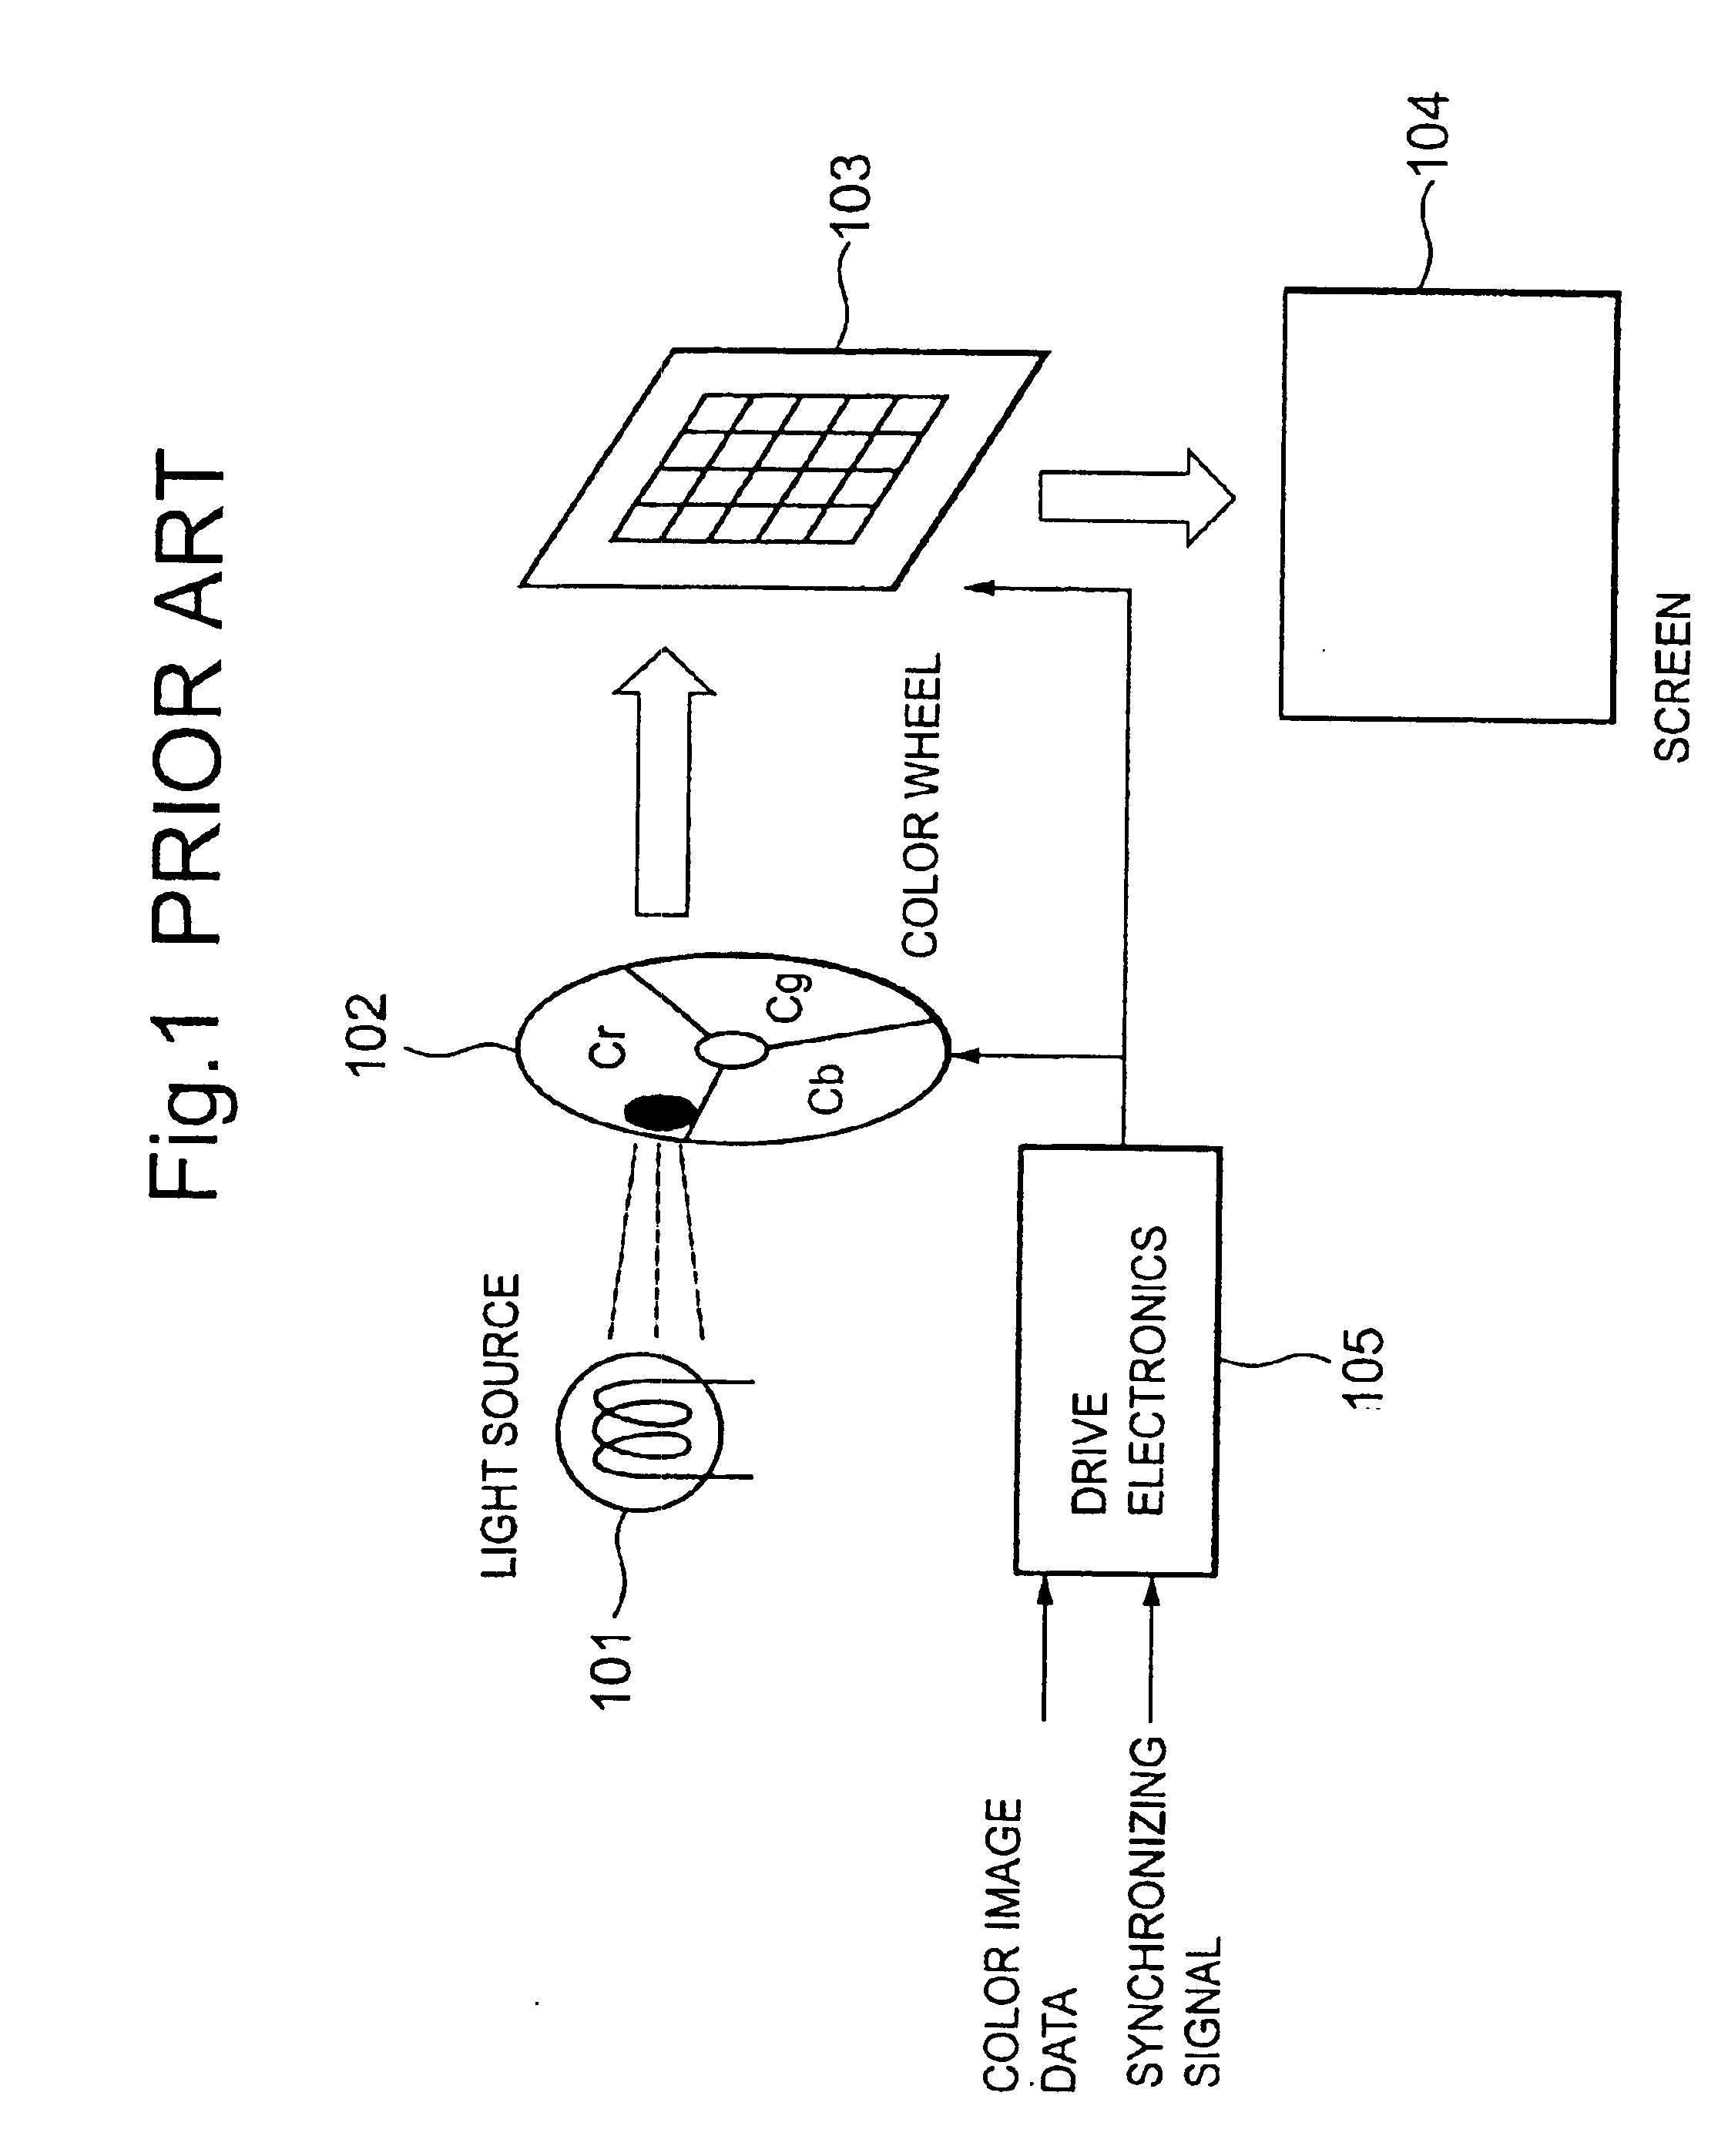 Display device for displaying digital input image data using different filter segments for the lower and higher order bits